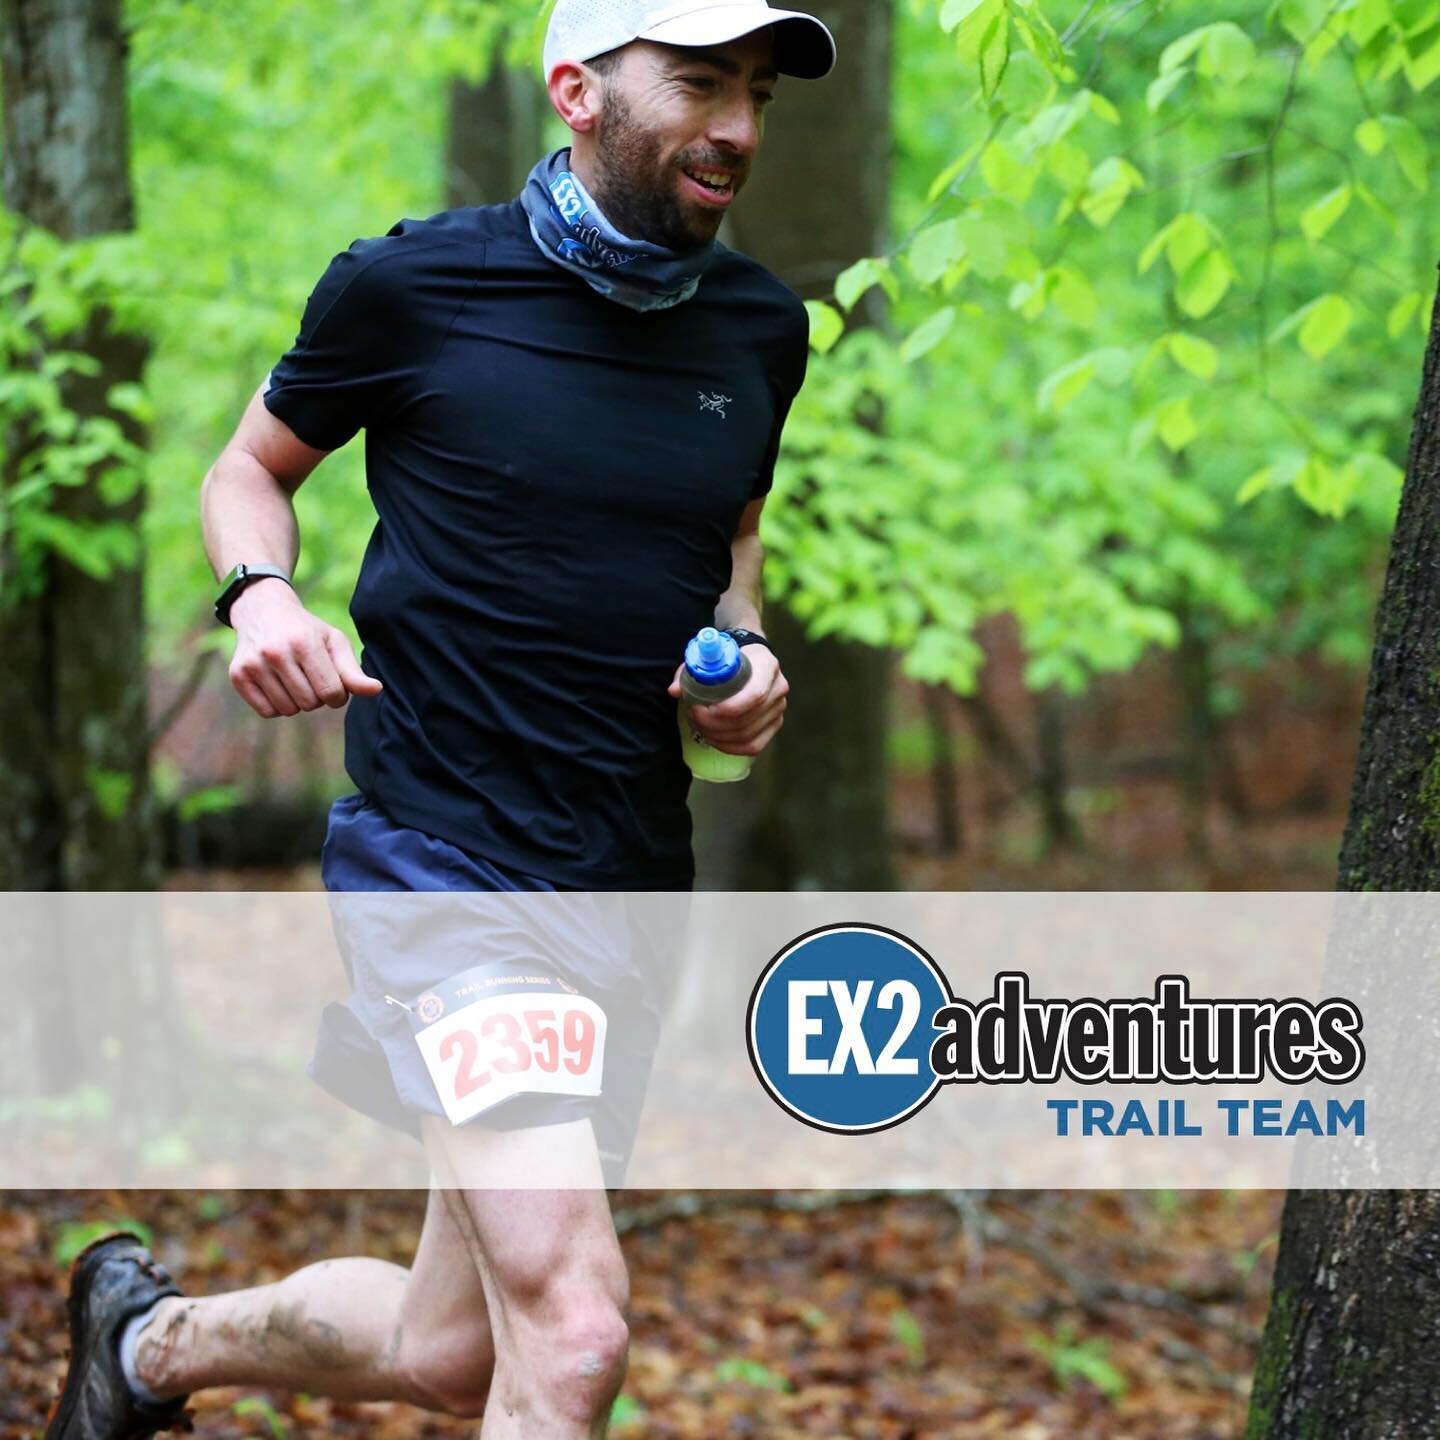 #Gratitude post. Tomorrow, I&rsquo;ll run my 48th race with @ex2adventures. Since my first #EX2 event 8 years ago, #trailrunning has become a huge part of my existence, and I owe so much of that to Andy Bacon and his team. 

Come out this fall to an 